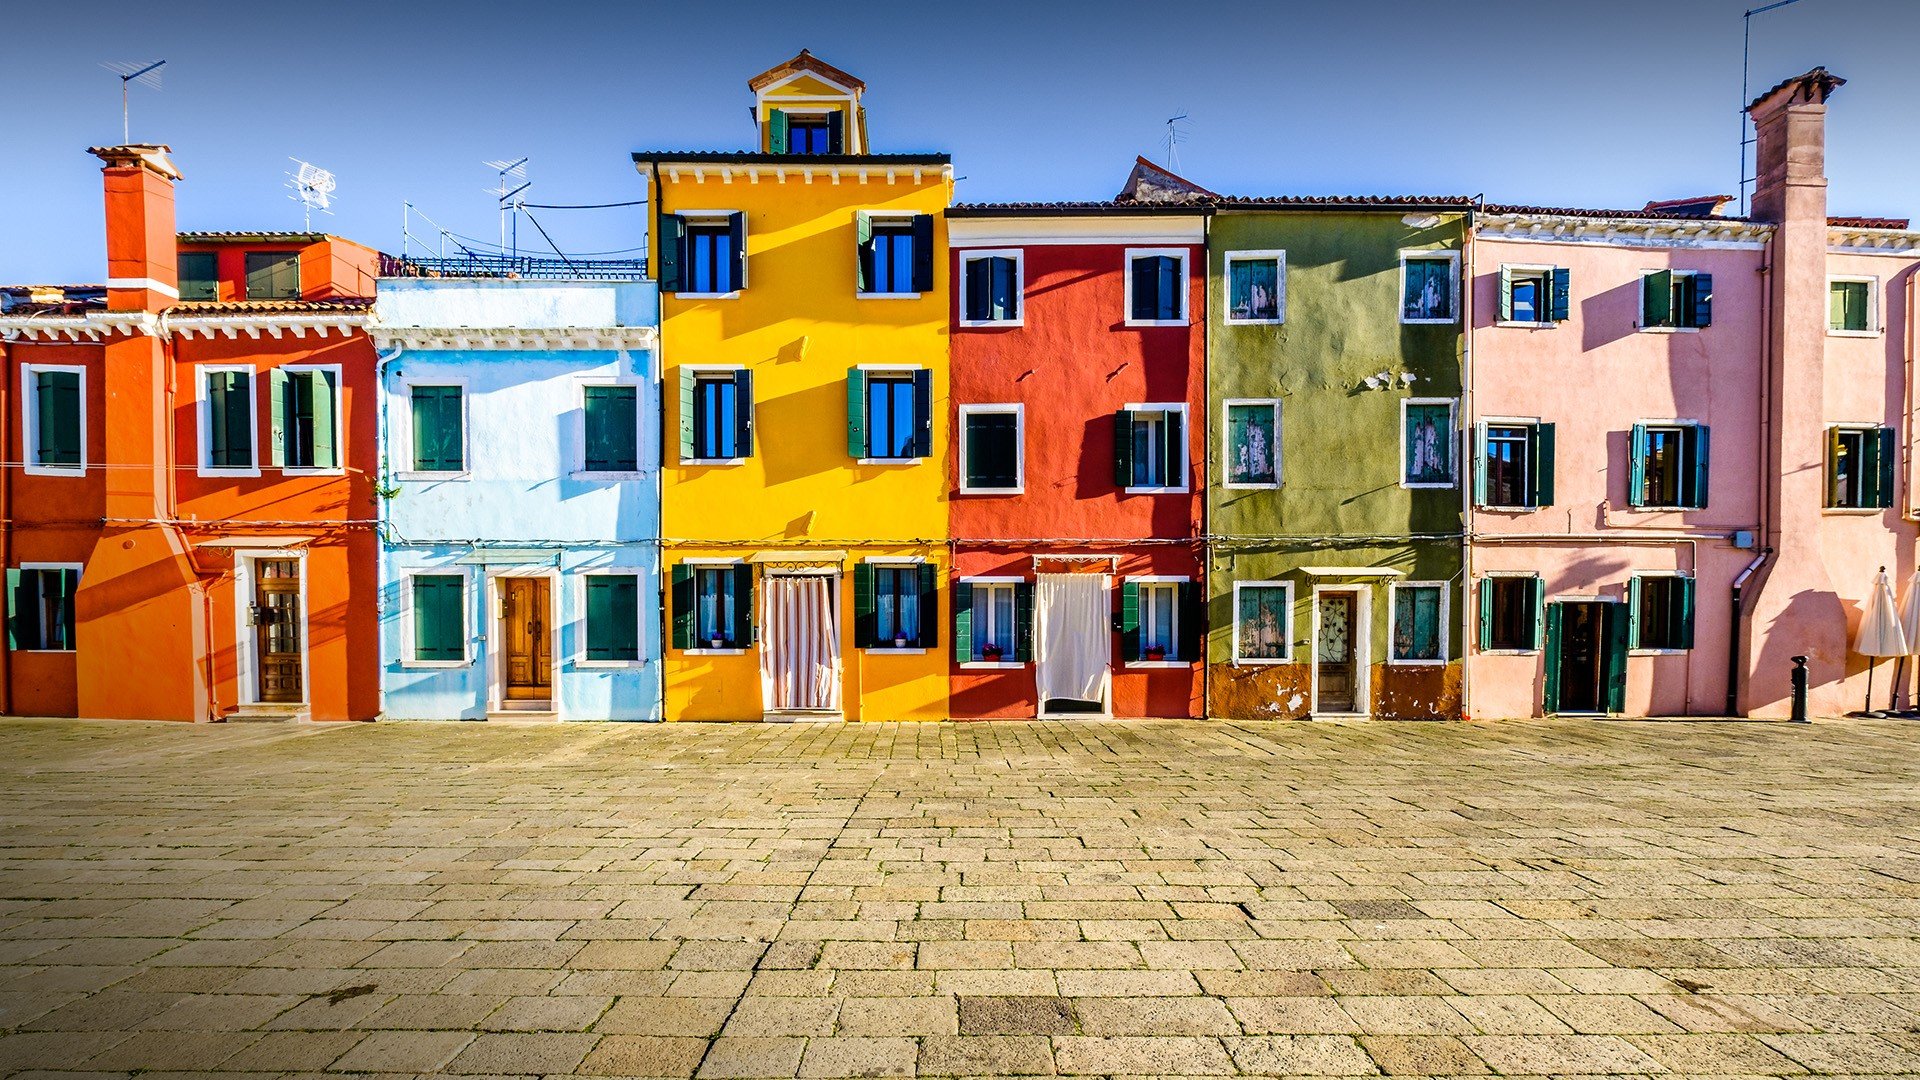 Wallpaper, nature, landscape, architecture, house, colorful, street, Venice, Italy 1920x1080